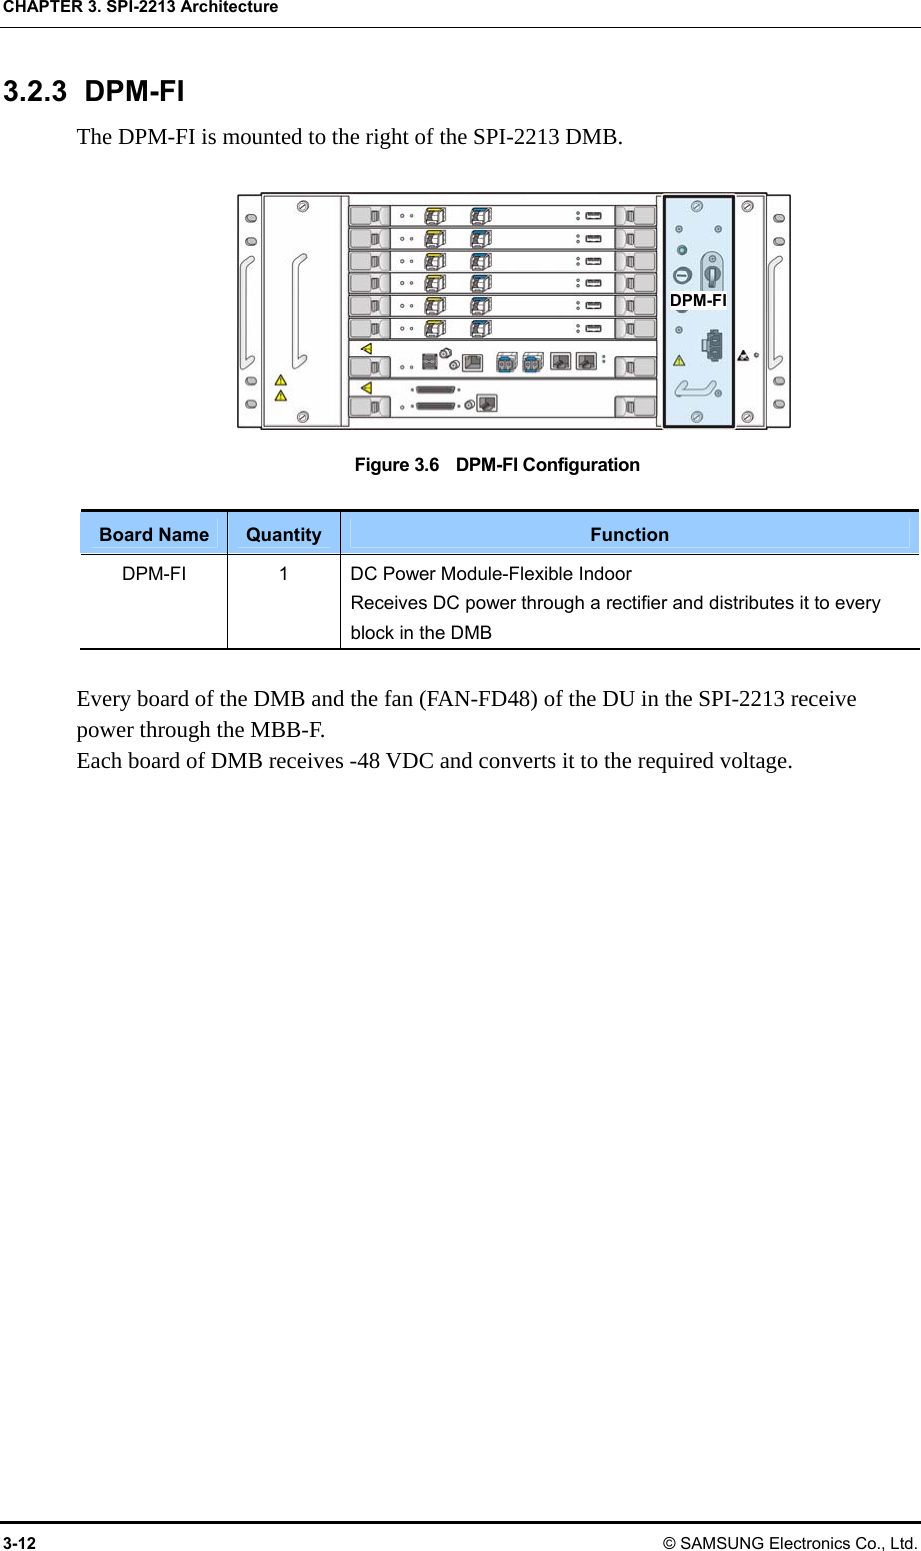 CHAPTER 3. SPI-2213 Architecture 3-12 © SAMSUNG Electronics Co., Ltd. 3.2.3 DPM-FI The DPM-FI is mounted to the right of the SPI-2213 DMB.  Figure 3.6    DPM-FI Configuration  Board Name  Quantity  Function DPM-FI  1  DC Power Module-Flexible Indoor Receives DC power through a rectifier and distributes it to every block in the DMB  Every board of the DMB and the fan (FAN-FD48) of the DU in the SPI-2213 receive power through the MBB-F. Each board of DMB receives -48 VDC and converts it to the required voltage.  DPM-FI 